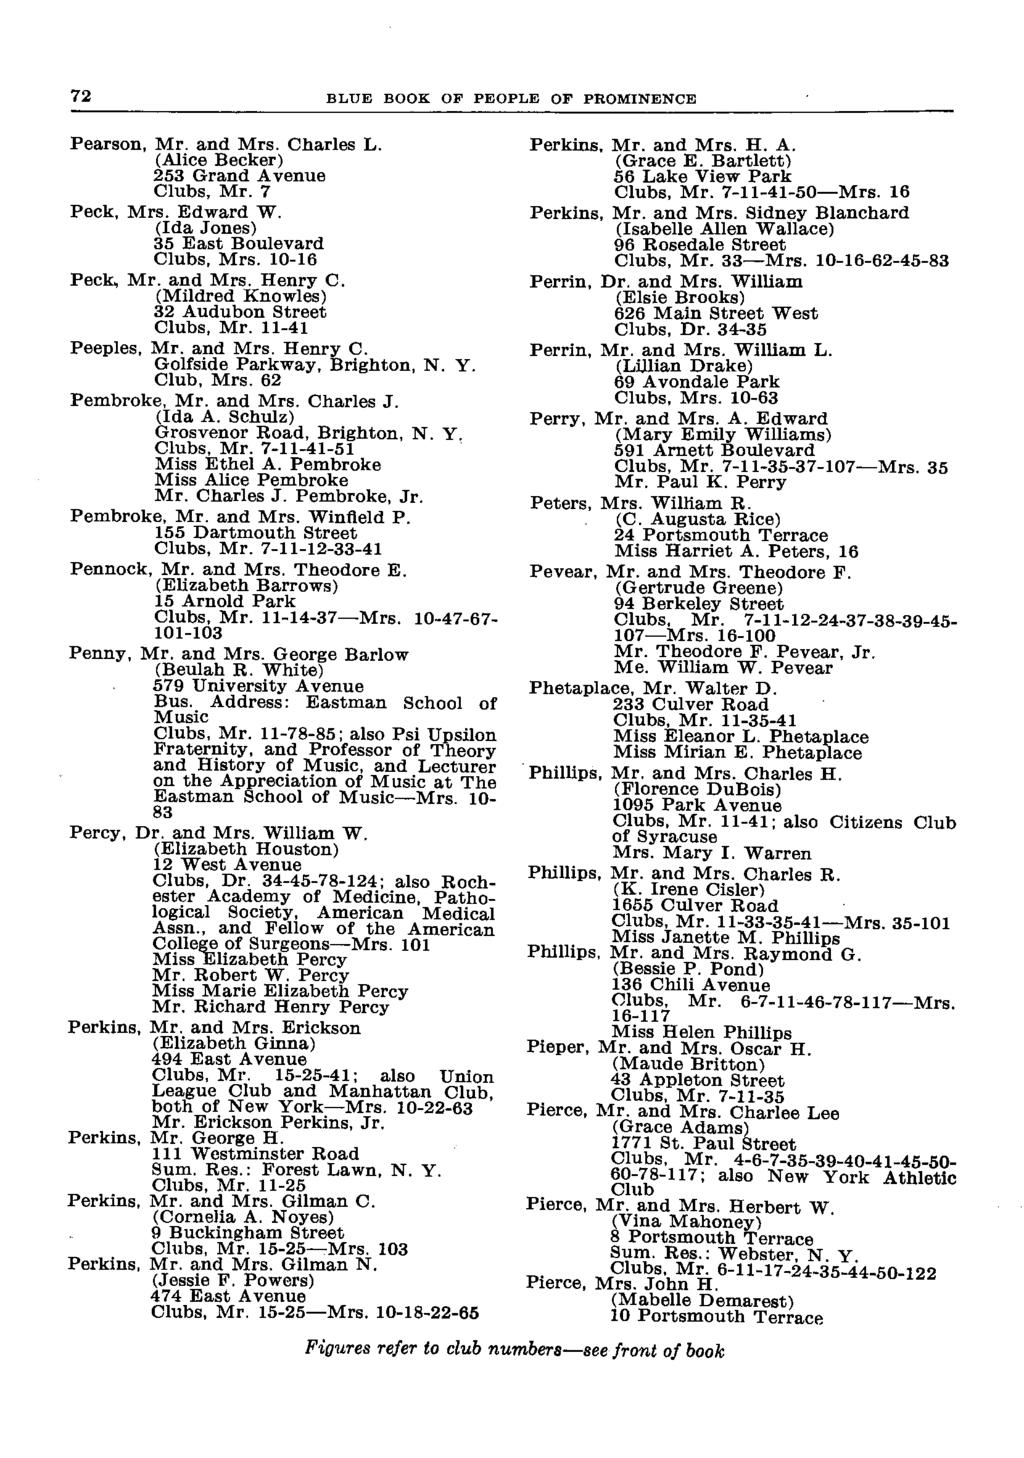 BLUE BOOK OF PEOPLE OF PROMINENCE Pearson, Mr. and Mrs. Charles L. (Alice Becker) 253 Grand Avenue Clubs, Mr. 7 Peck, Mrs. Edward W. (Ida Jones) 35 East Boulevard Clubs, Mrs. 10-16 Peck, Mr. and Mrs. Henry C.